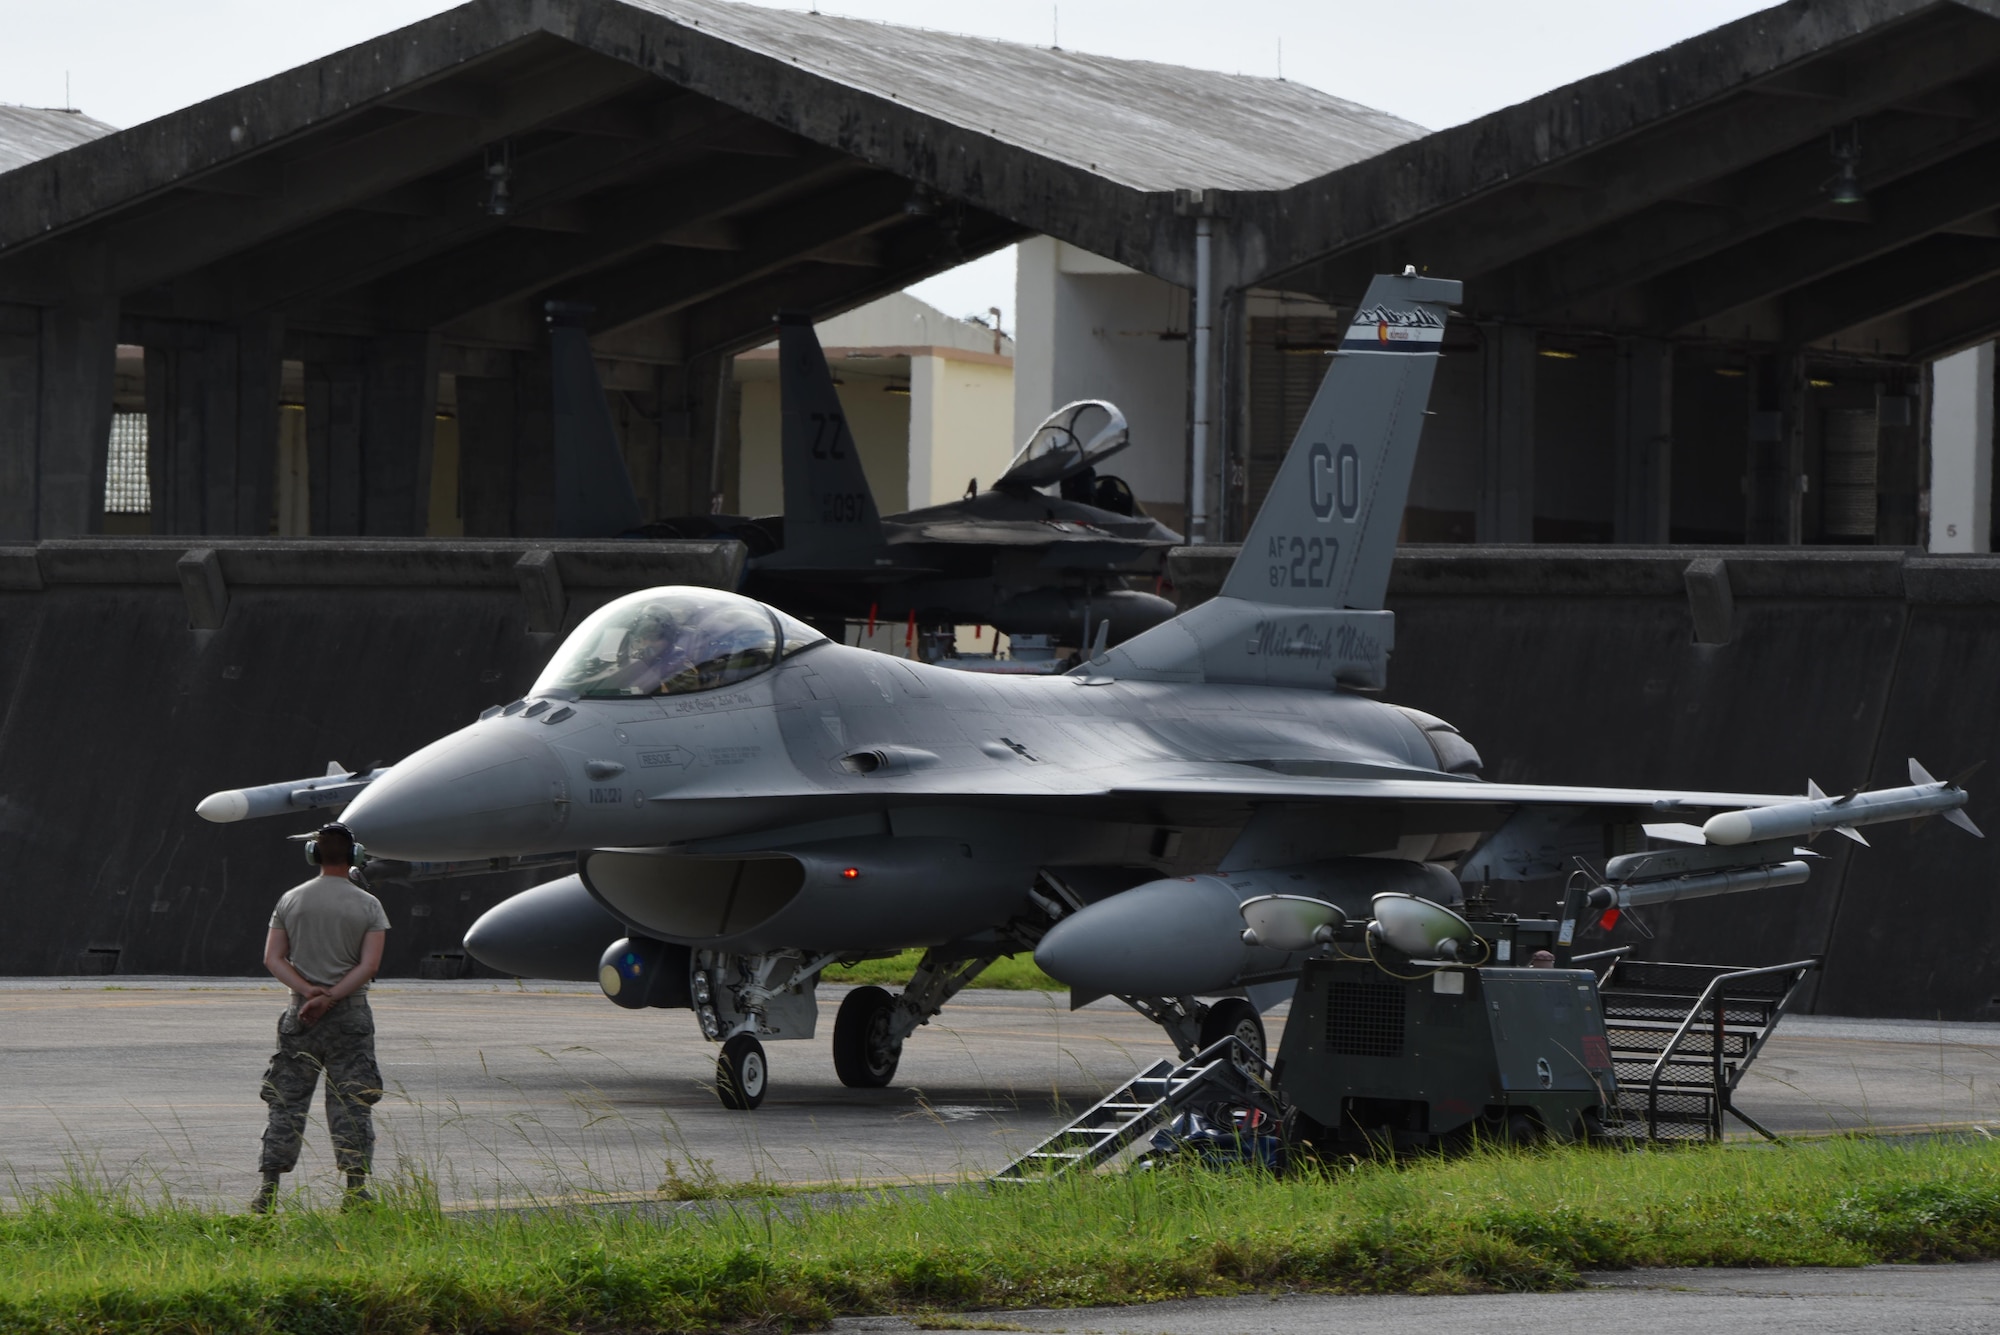 An F-16 aircraft on the flight line preparing to take off.